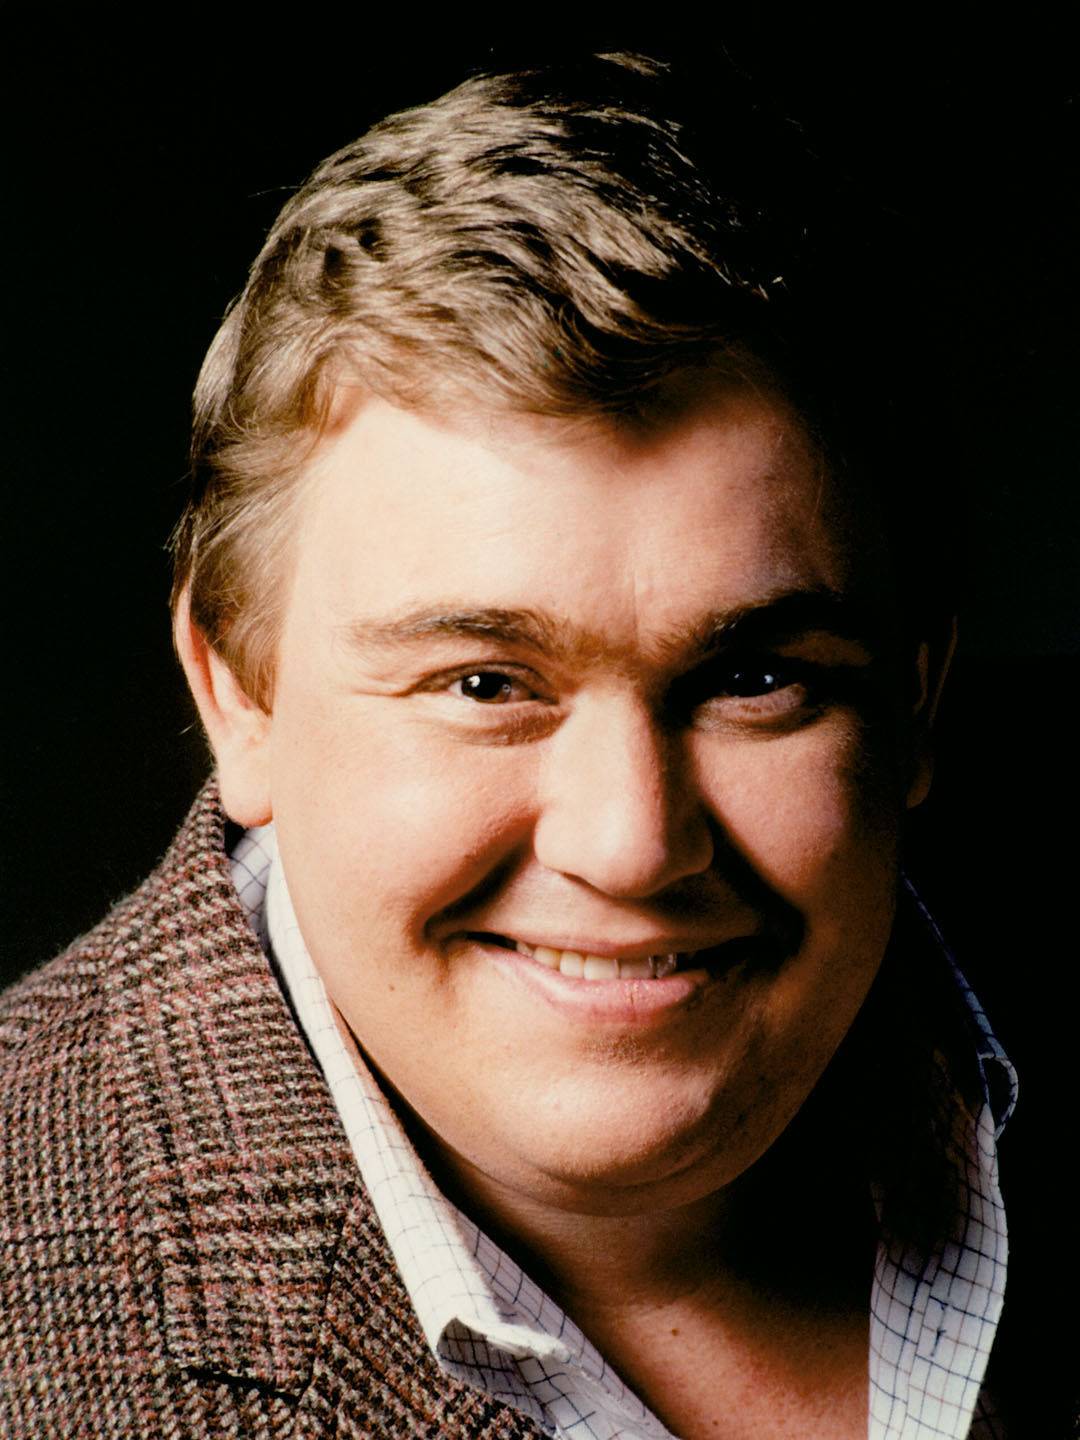 John Candy wearing a brown coat and smiling